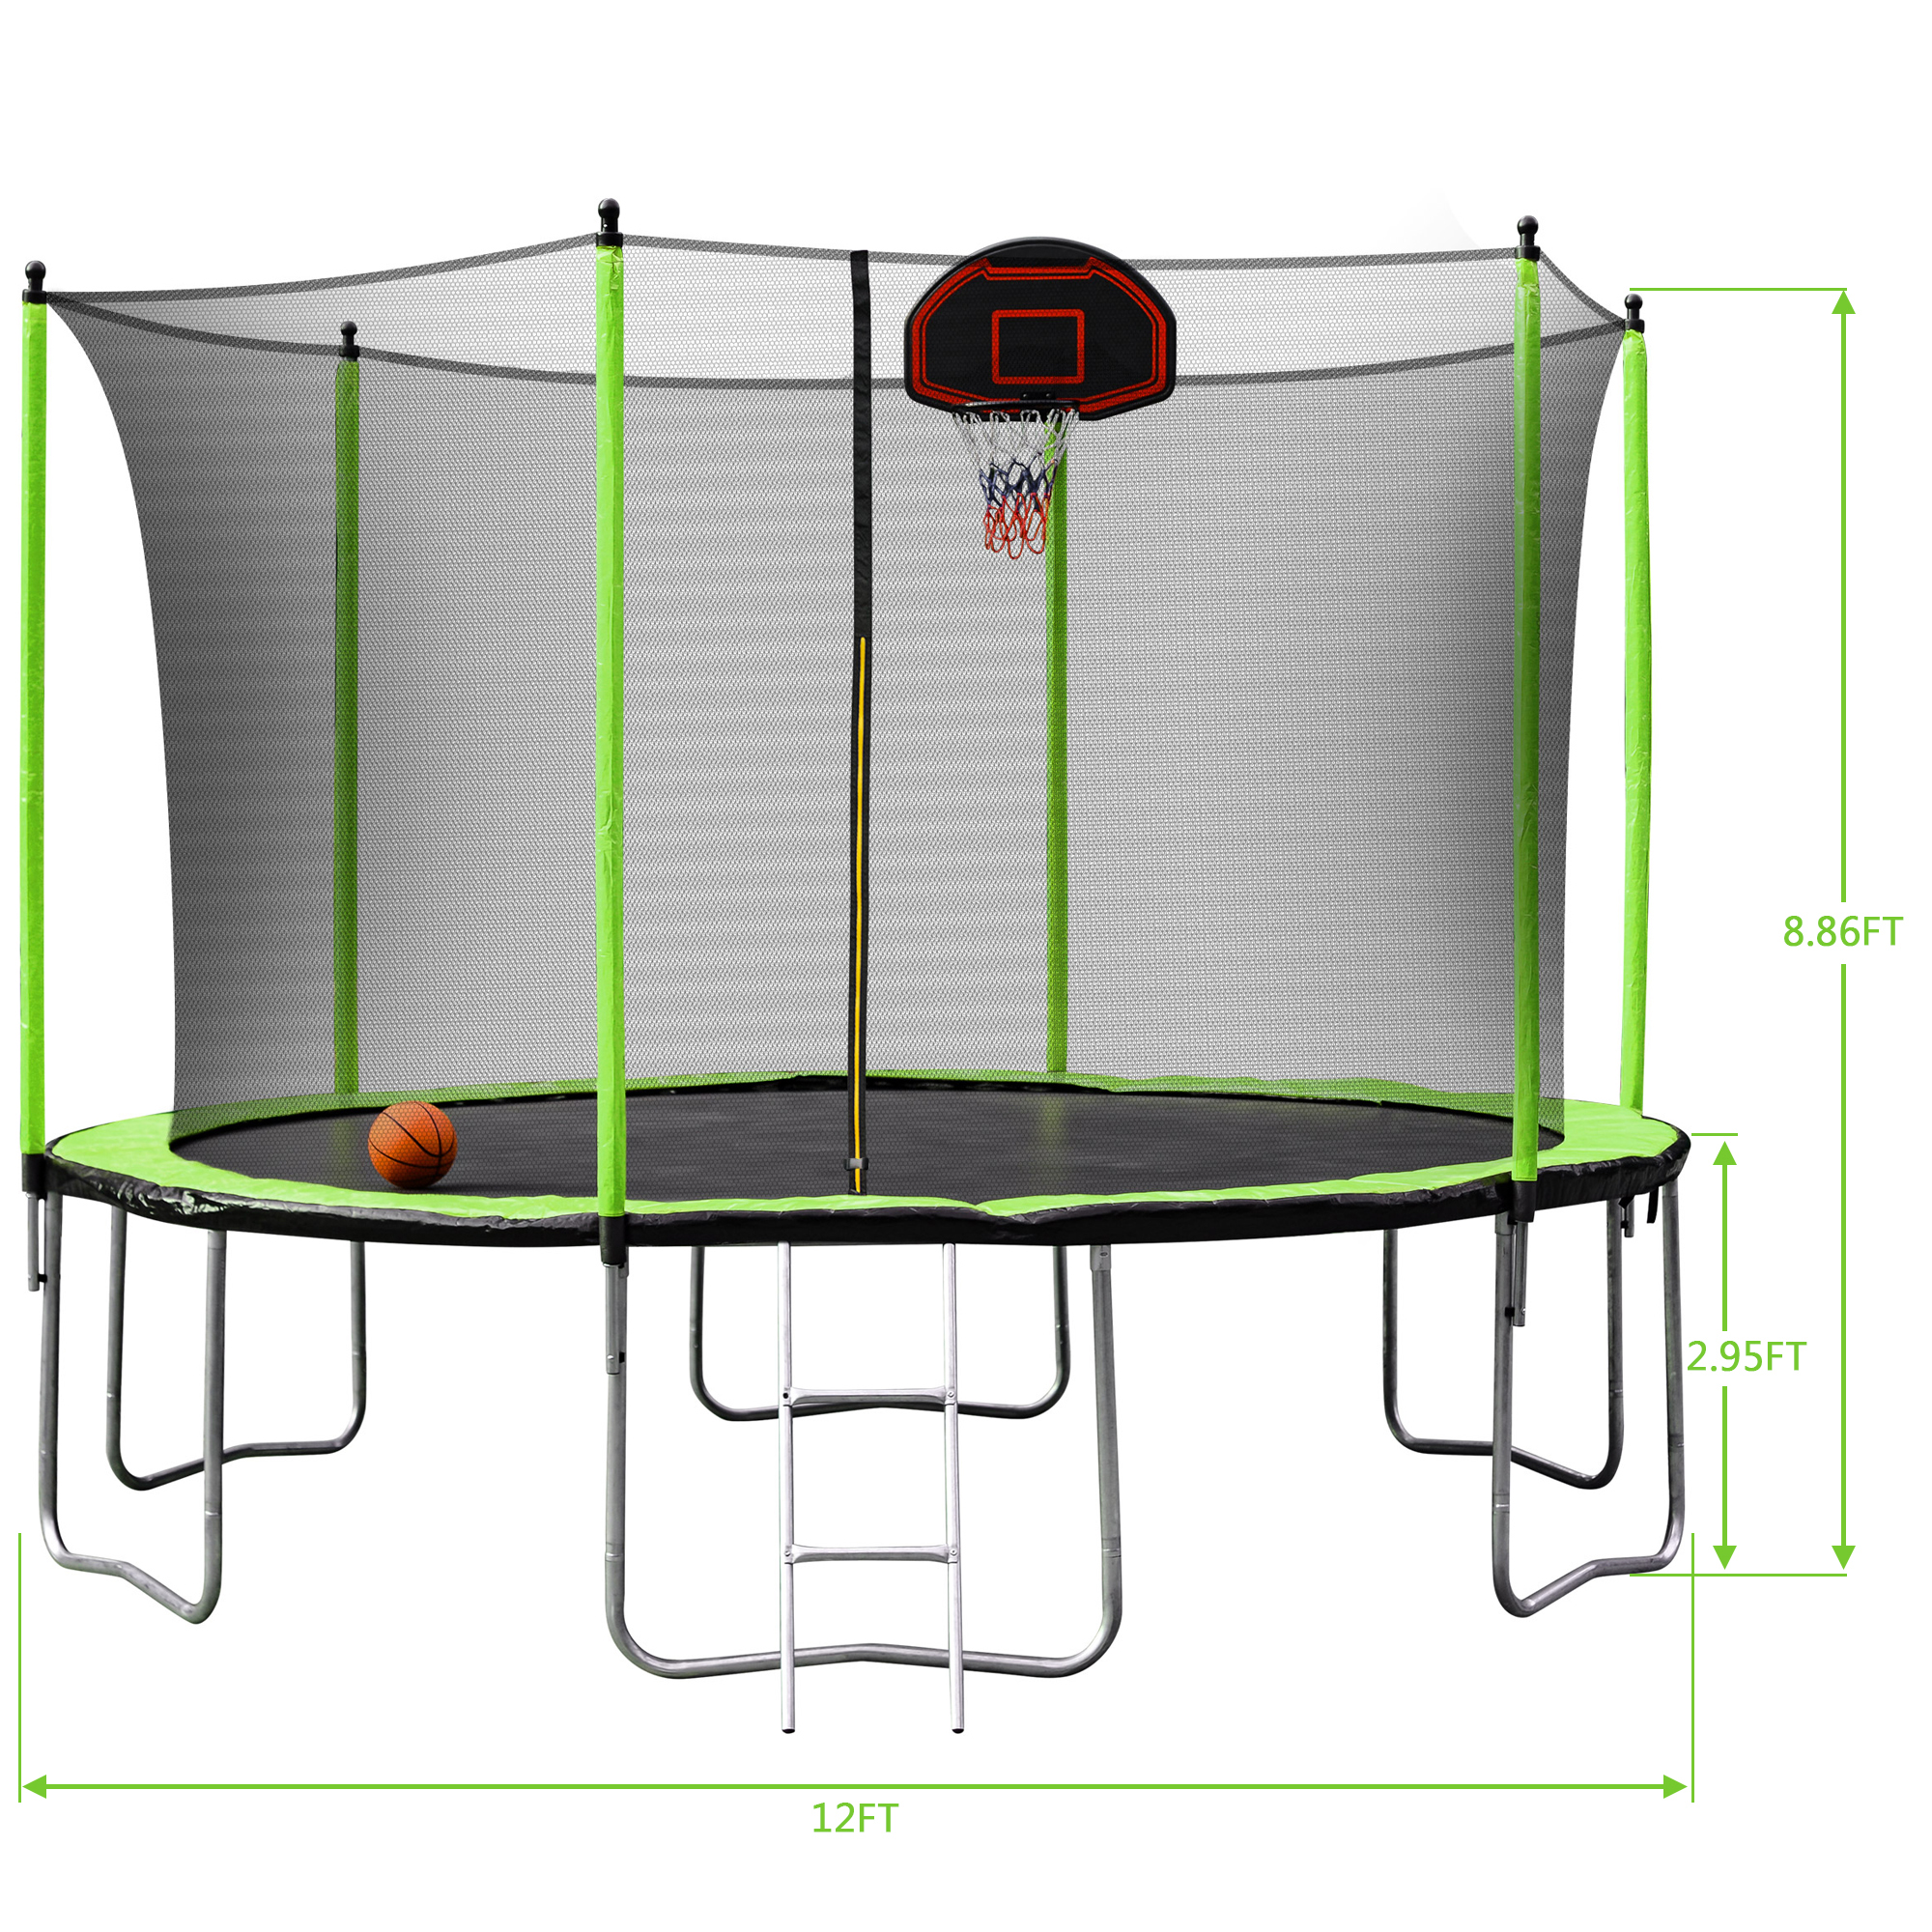 Round Spring Kids Outdoor Trampoline 12ft With Enclosure Fitness Trampoline Jumping Sport Trampoline